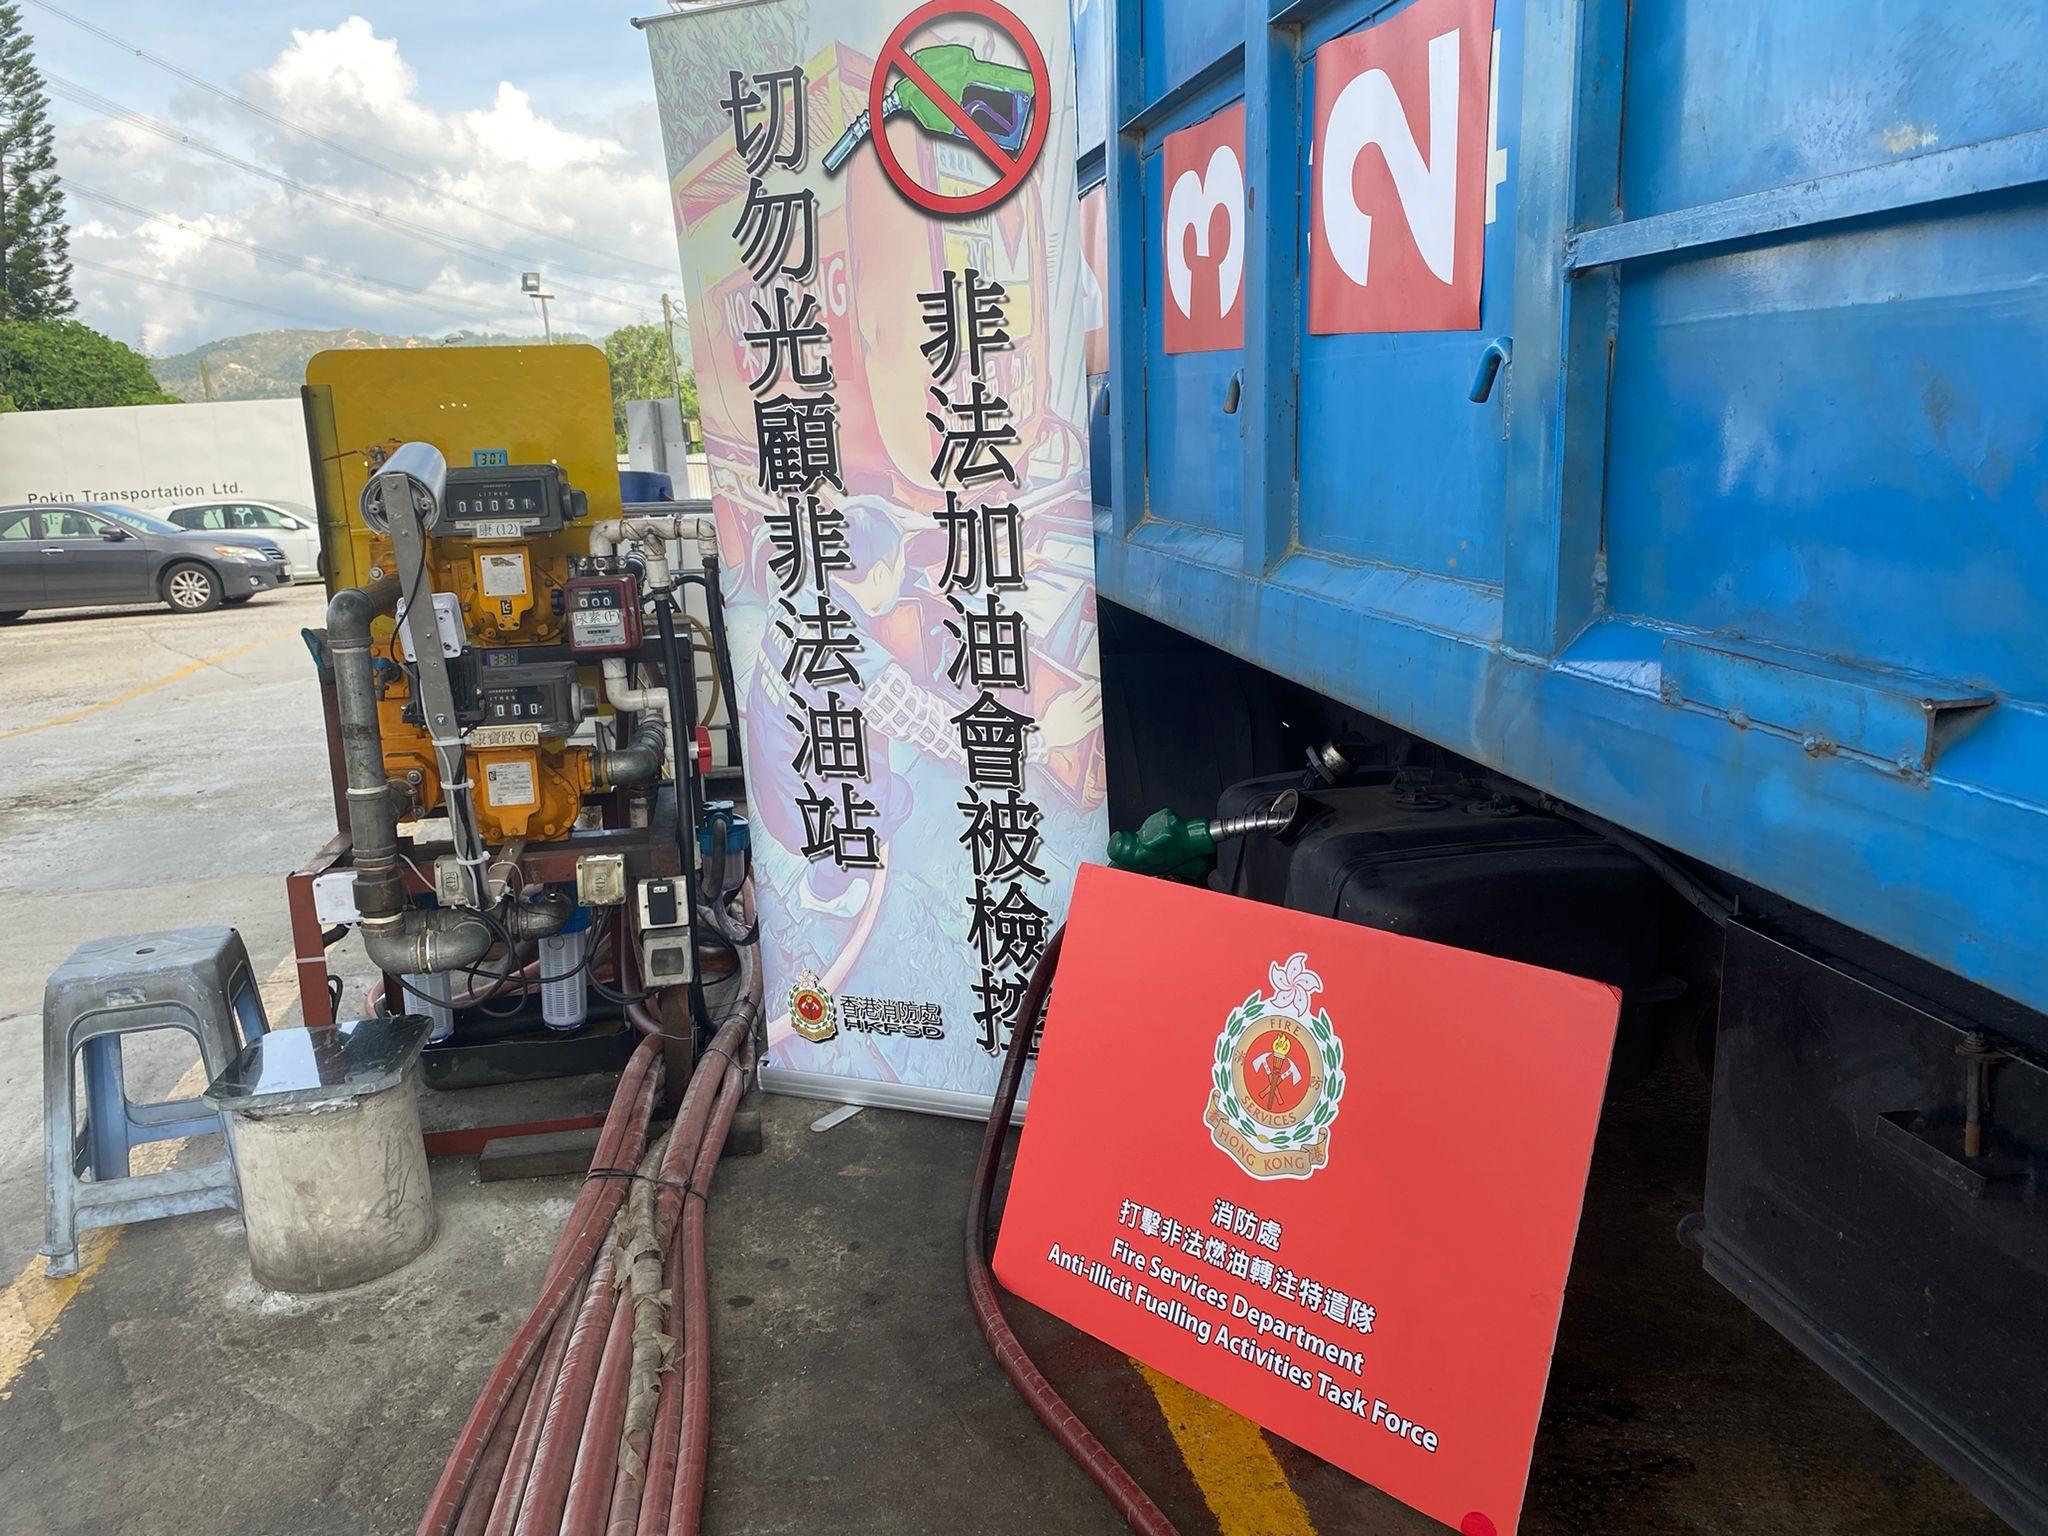 The Fire Services Department, the Hong Kong Police Force and Hong Kong Customs mounted a territory-wide joint operation codenamed "Fire Thunder" from September 27 to 29 to combat illicit fuelling activities. Photo shows fuelling tools suspected to be involved in illicit fuelling activities.
